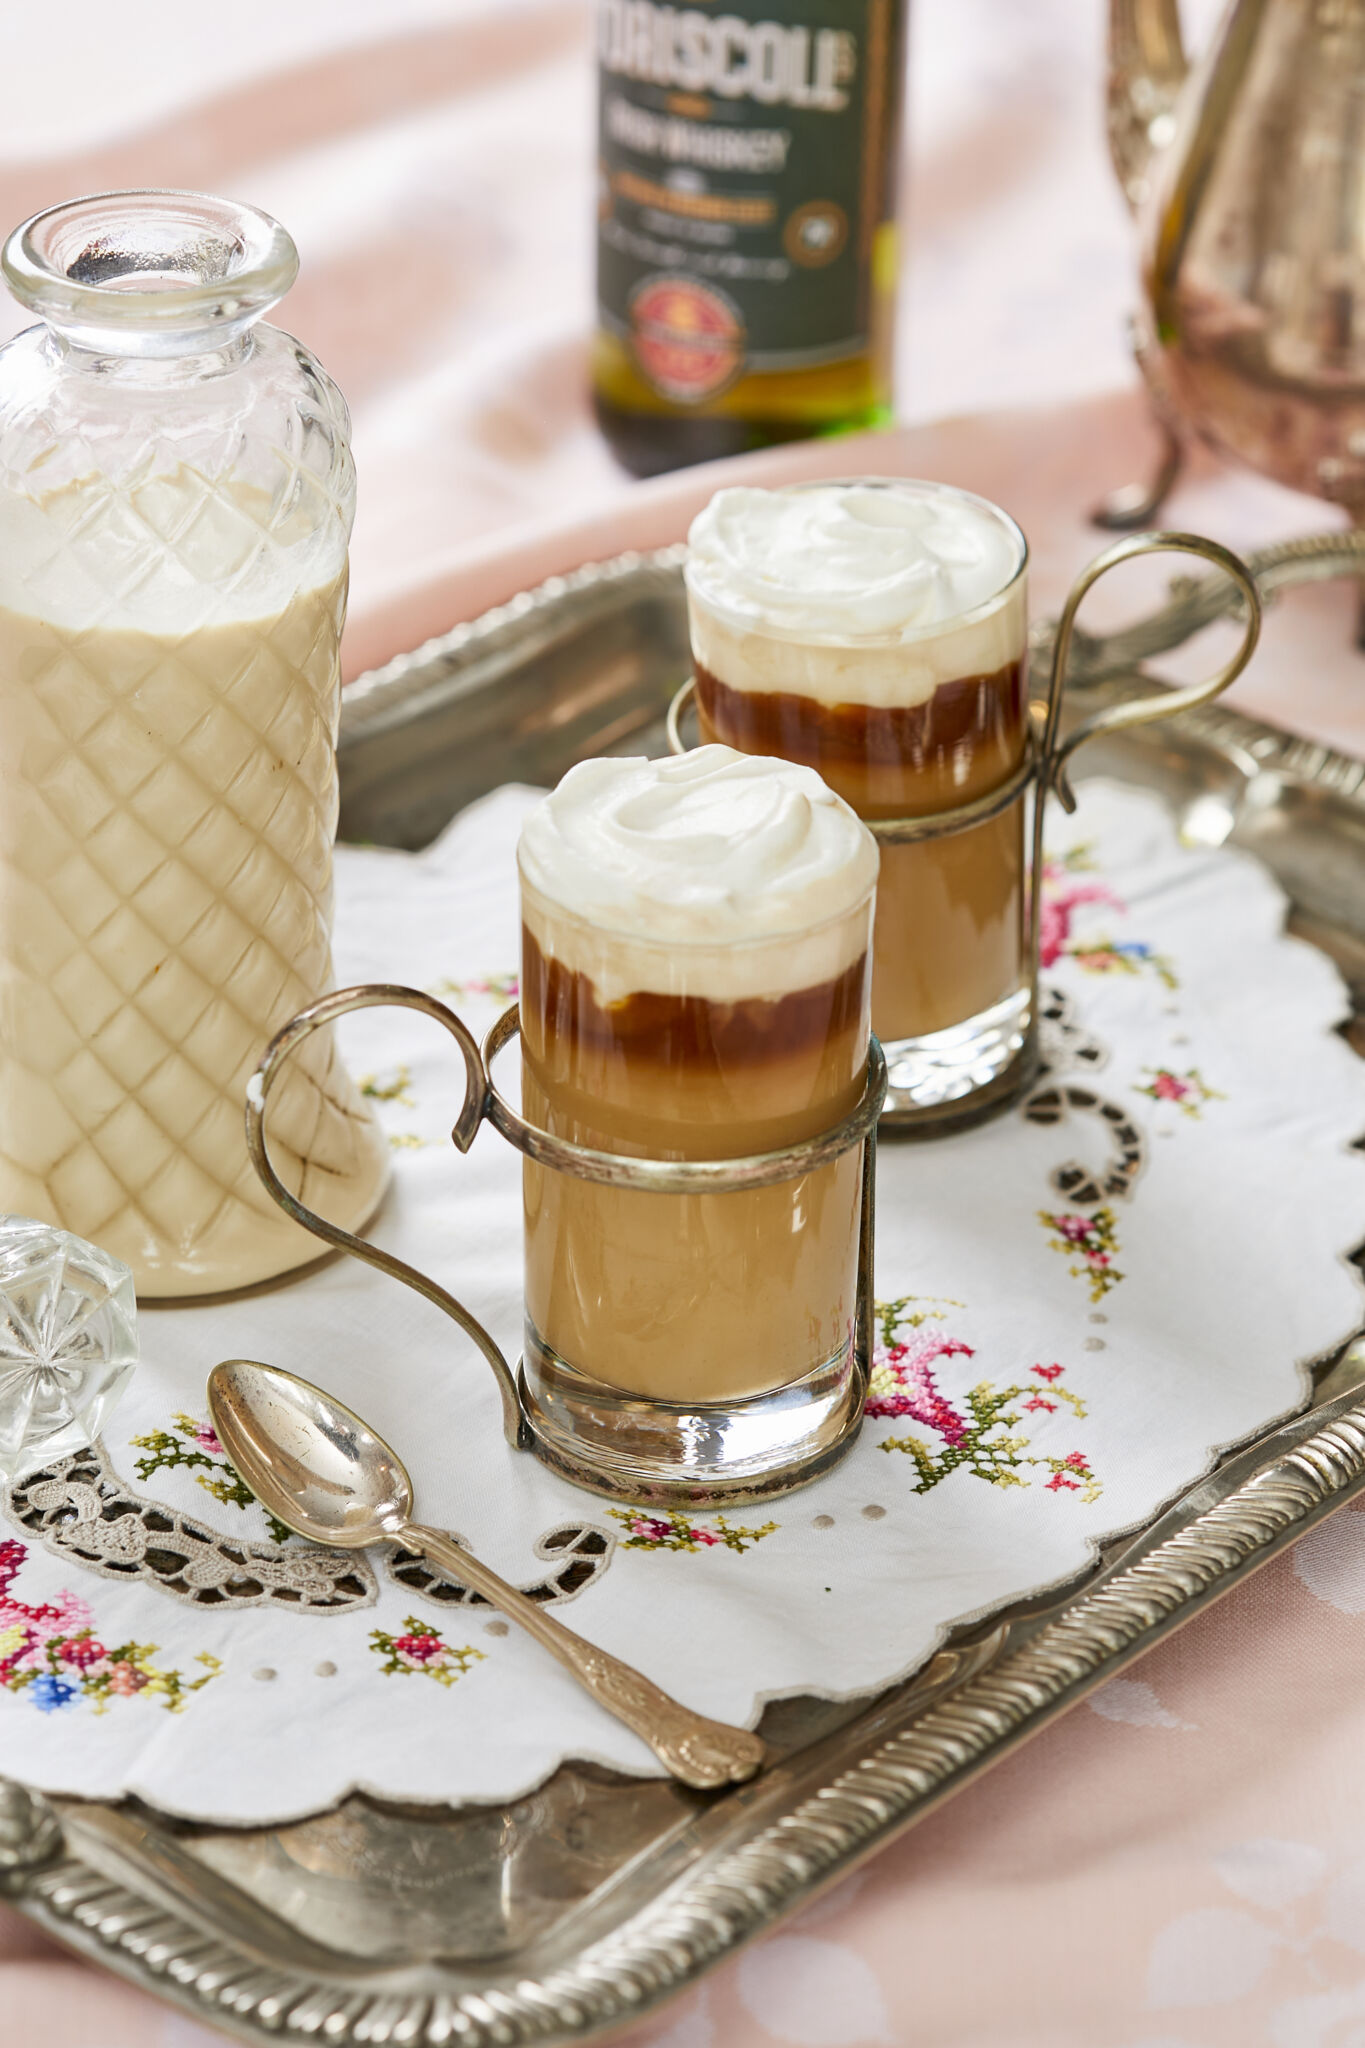 Silky smooth Homemade Irish Cream is in stored in a tall weave pattern glass bottle on the left side on a silver platter. To the right of the bottle are two glasses of Irish Cream Frappuccino which has blended sweet, floral, nutty and boozy Irish Cream with coffee and milk at the bottom, topped with pillowy whipped cream. A silver spoon is also on the platter next to the glasses. A bottle of O'Driscoll's whiskey and a tea pot are next to the platter in the upper right corner of the image. 